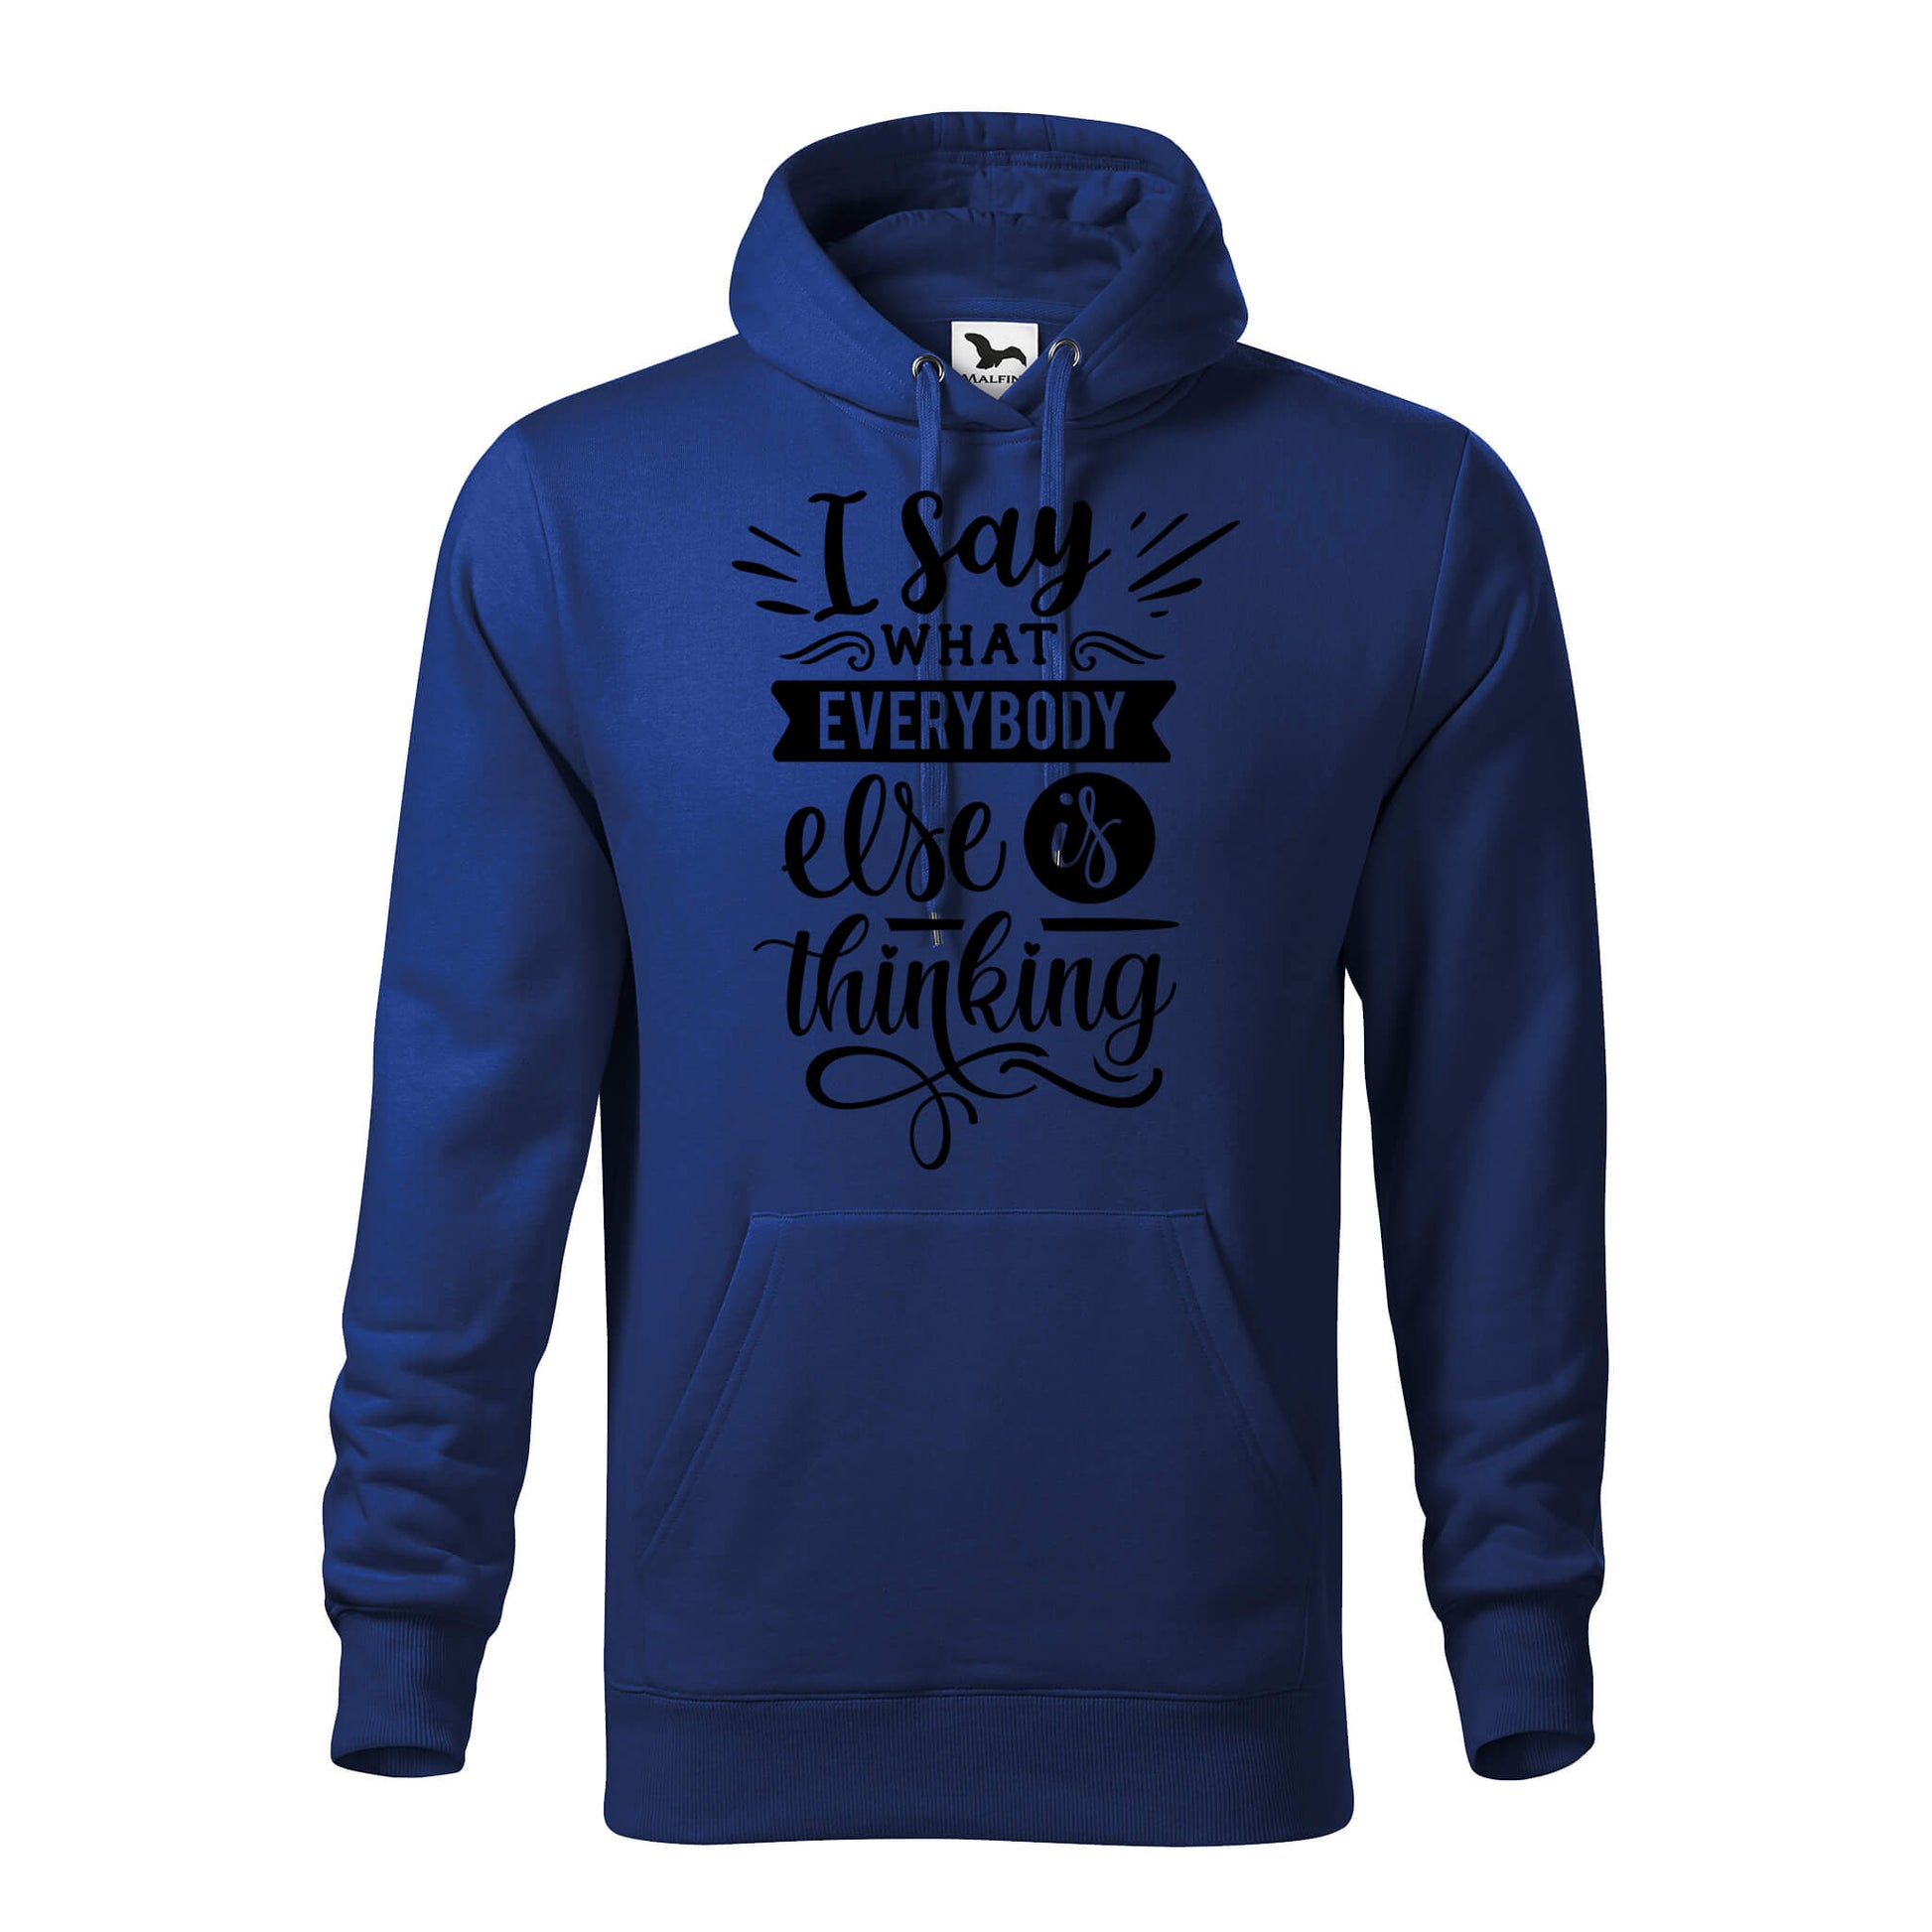 I say what everybody is thinking hoodie - rvdesignprint